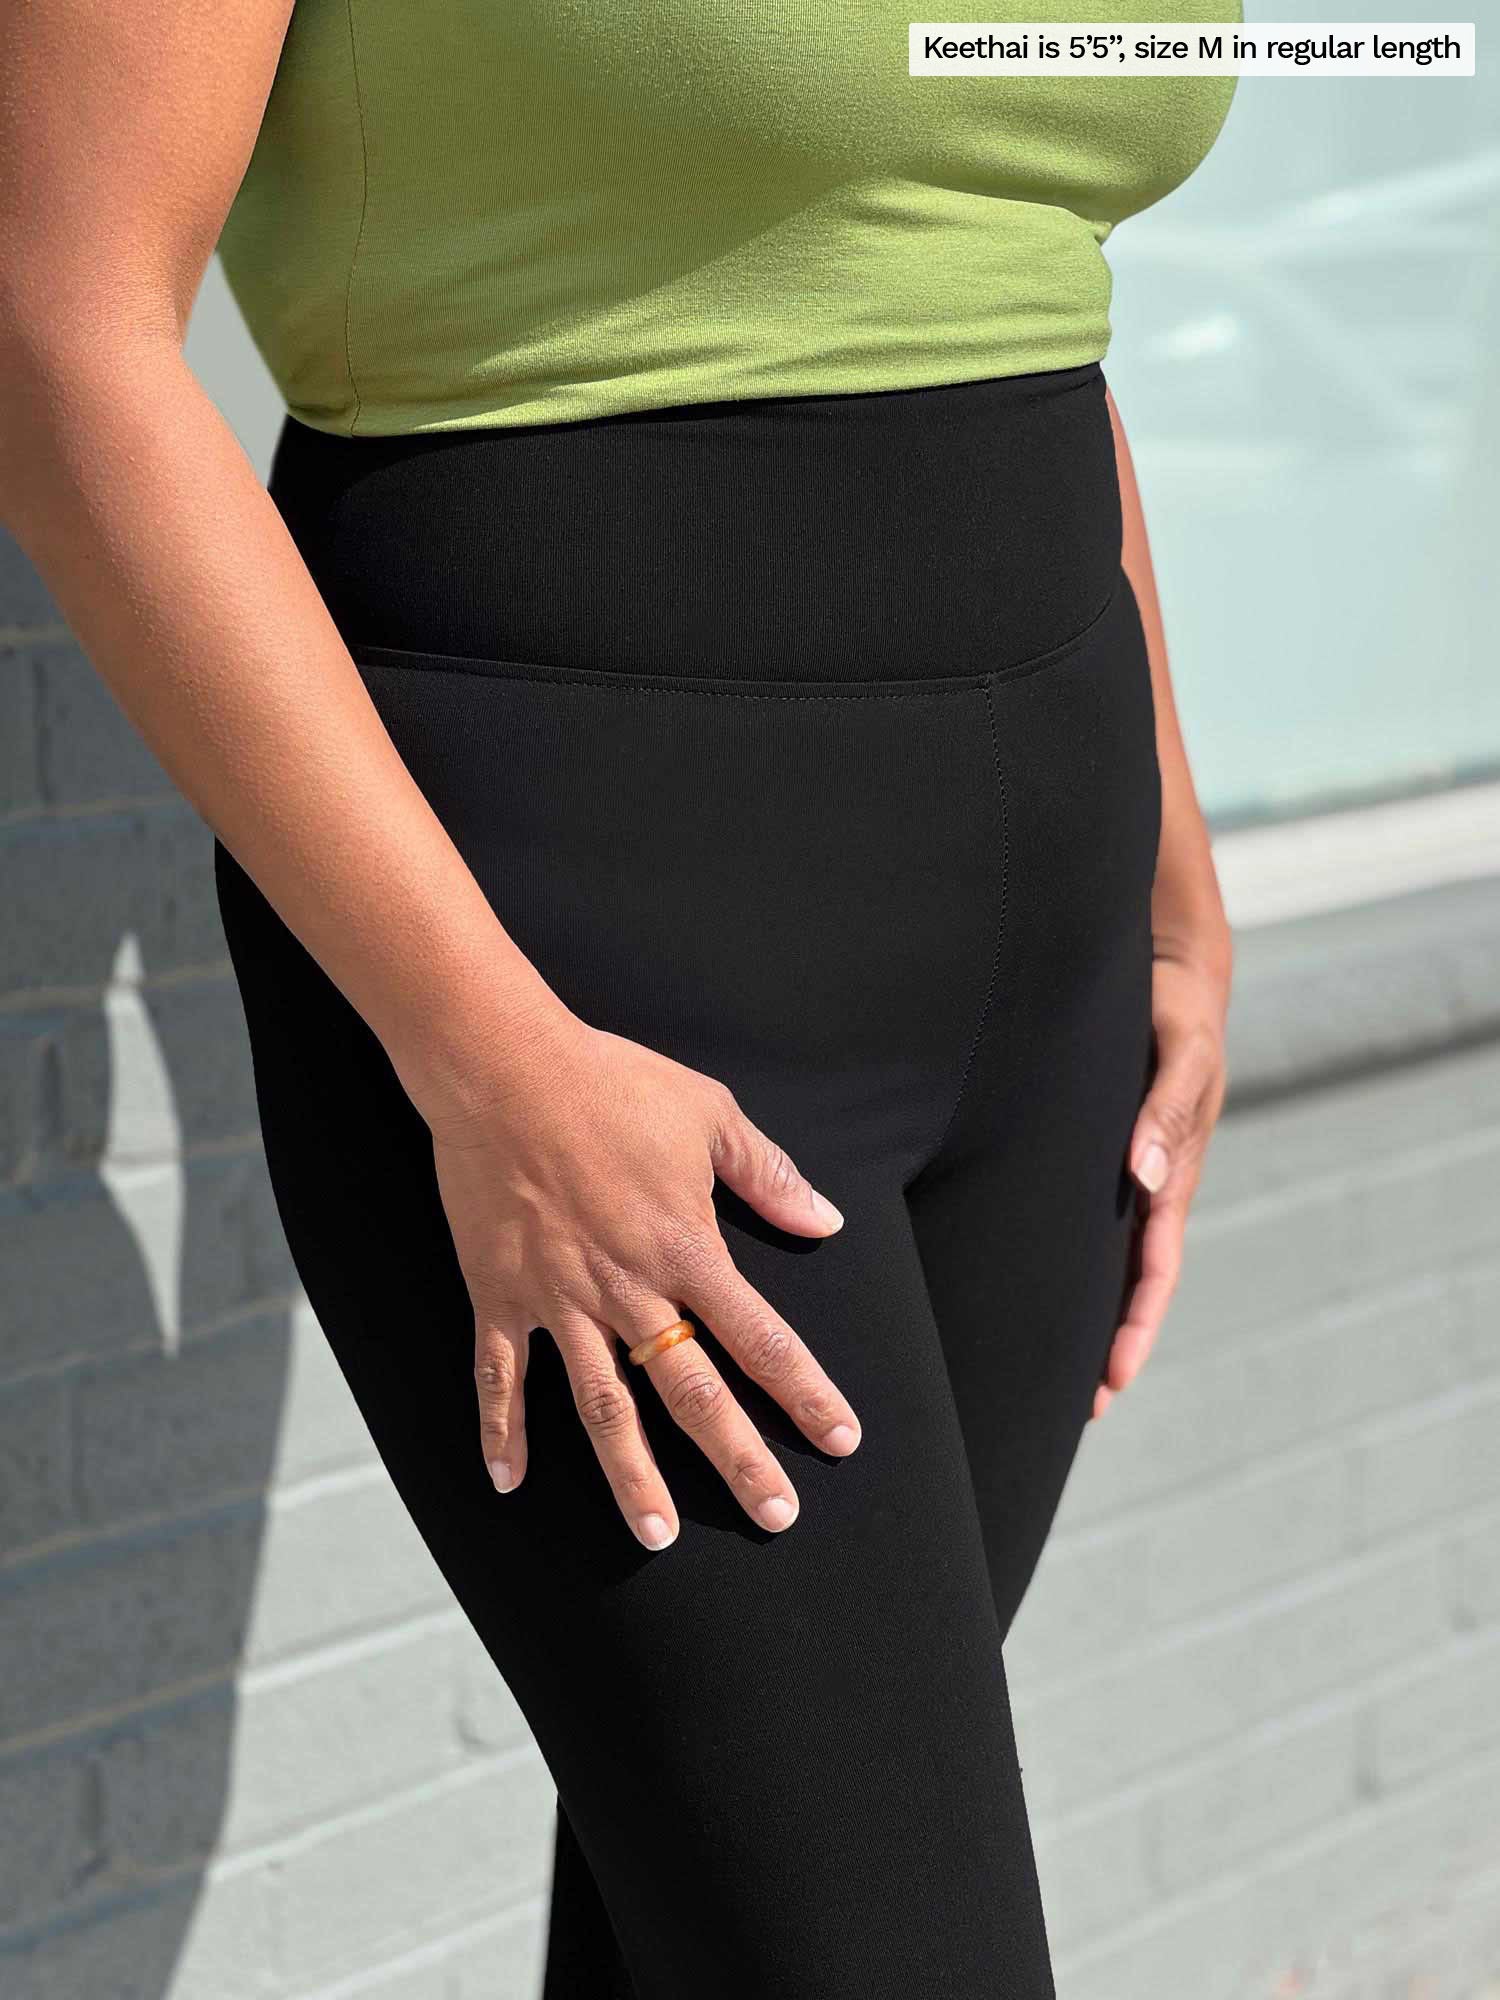 ALONG FIT Leggings for Women with 3 Pockets Buttery Soft High Waisted Yoga  Pants Non-See-Through Full-Length Tights, Leggings -  Canada